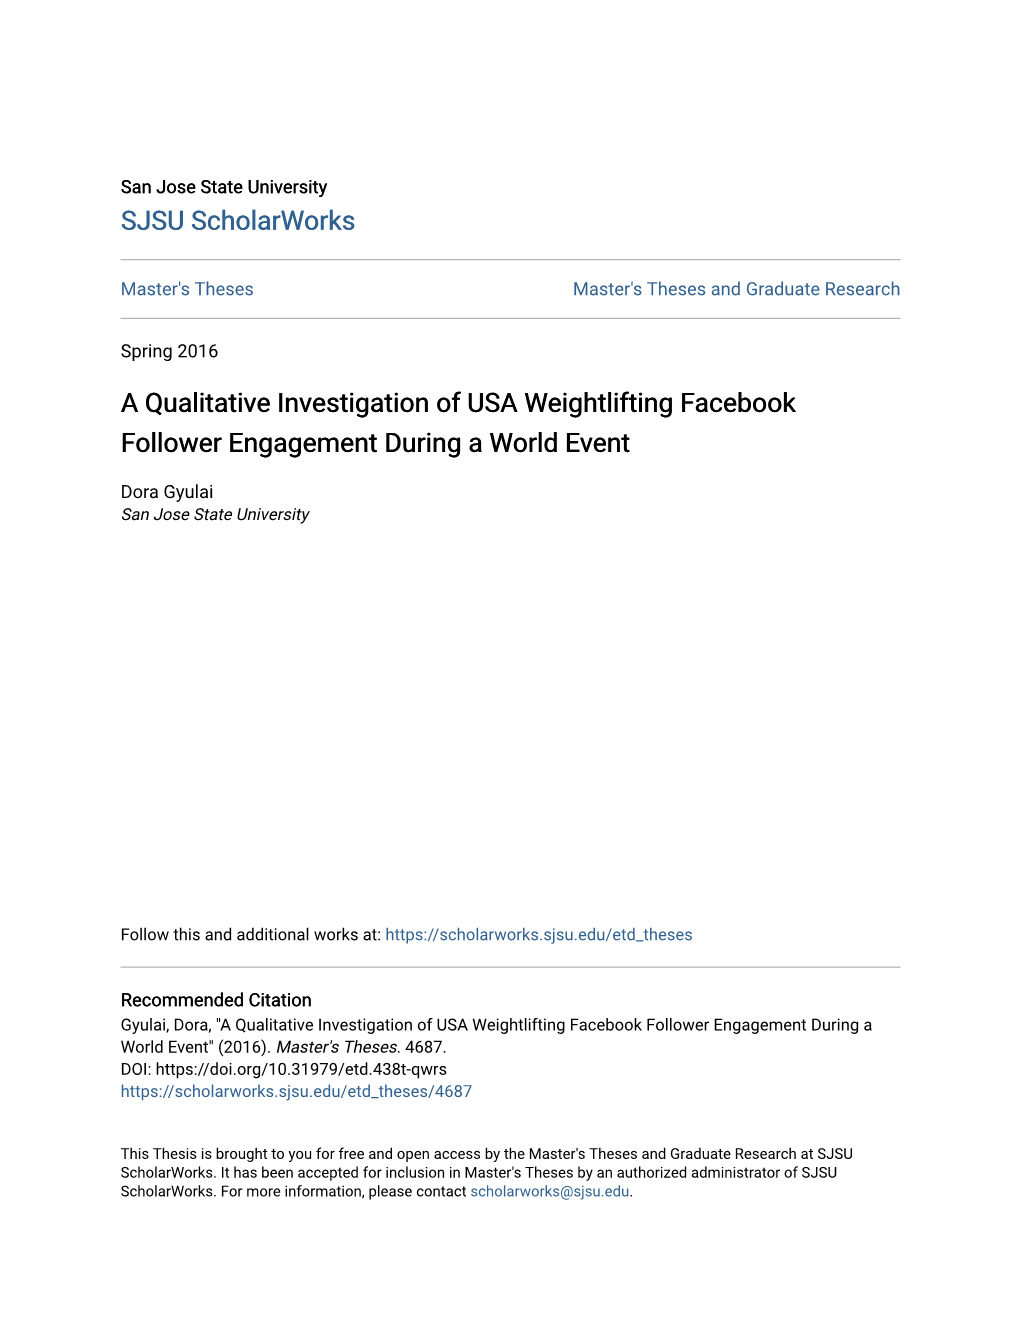 A Qualitative Investigation of USA Weightlifting Facebook Follower Engagement During a World Event